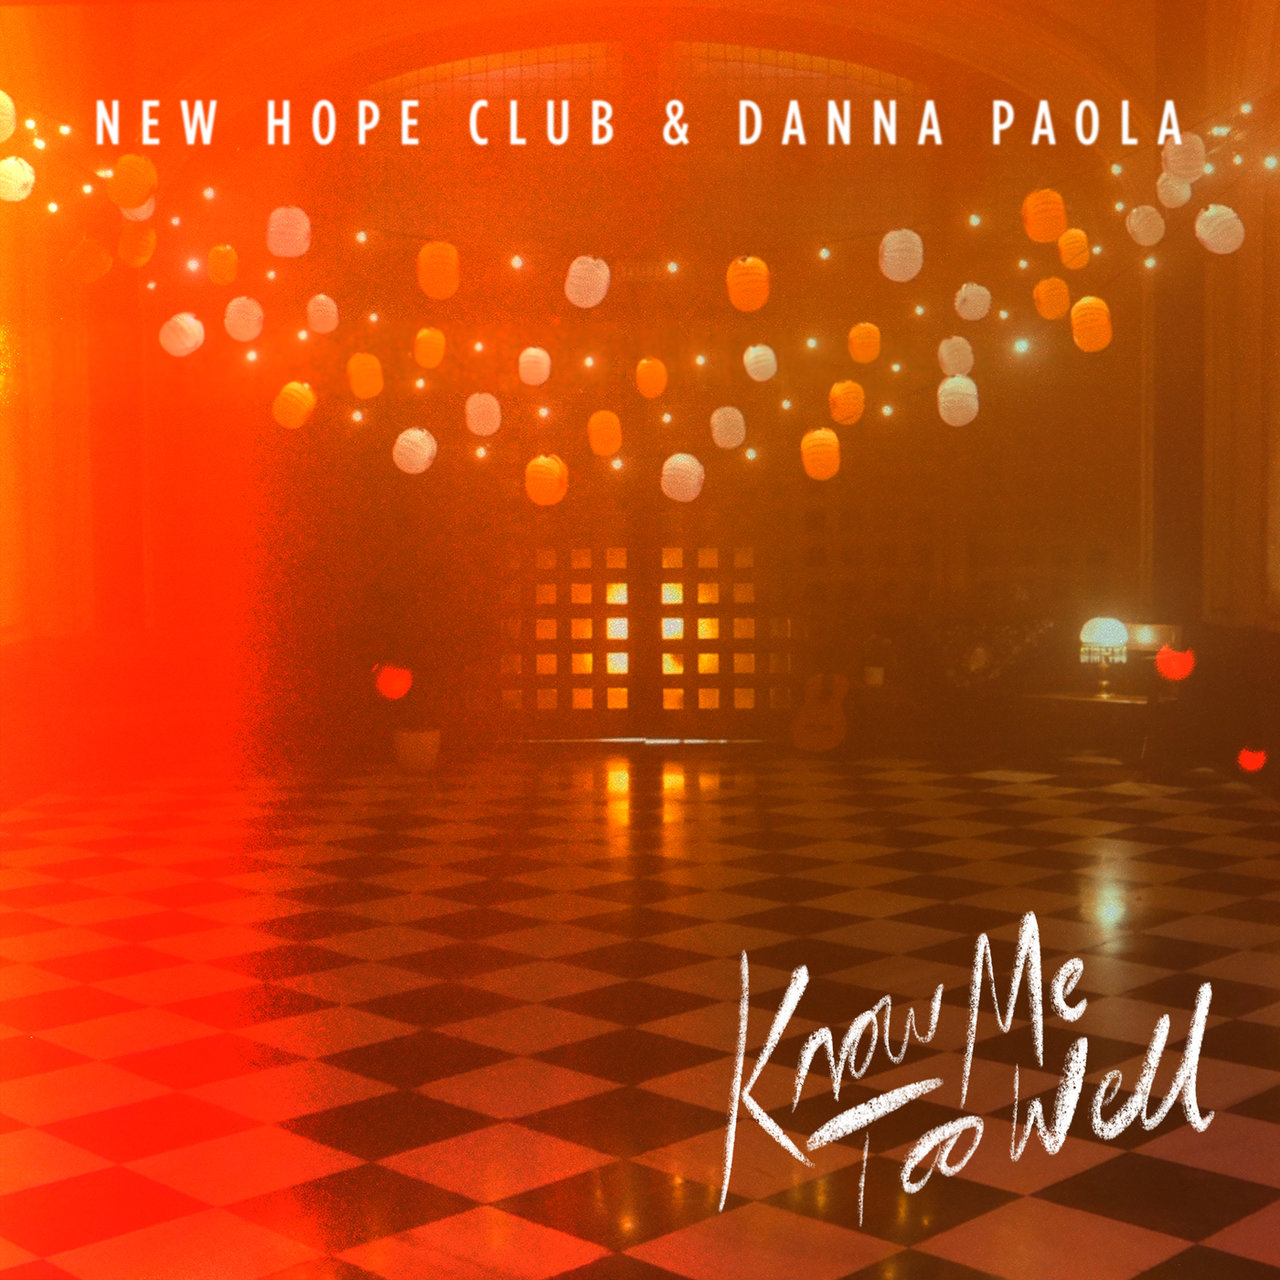 New Hope Club & Danna — Know Me Too Well cover artwork